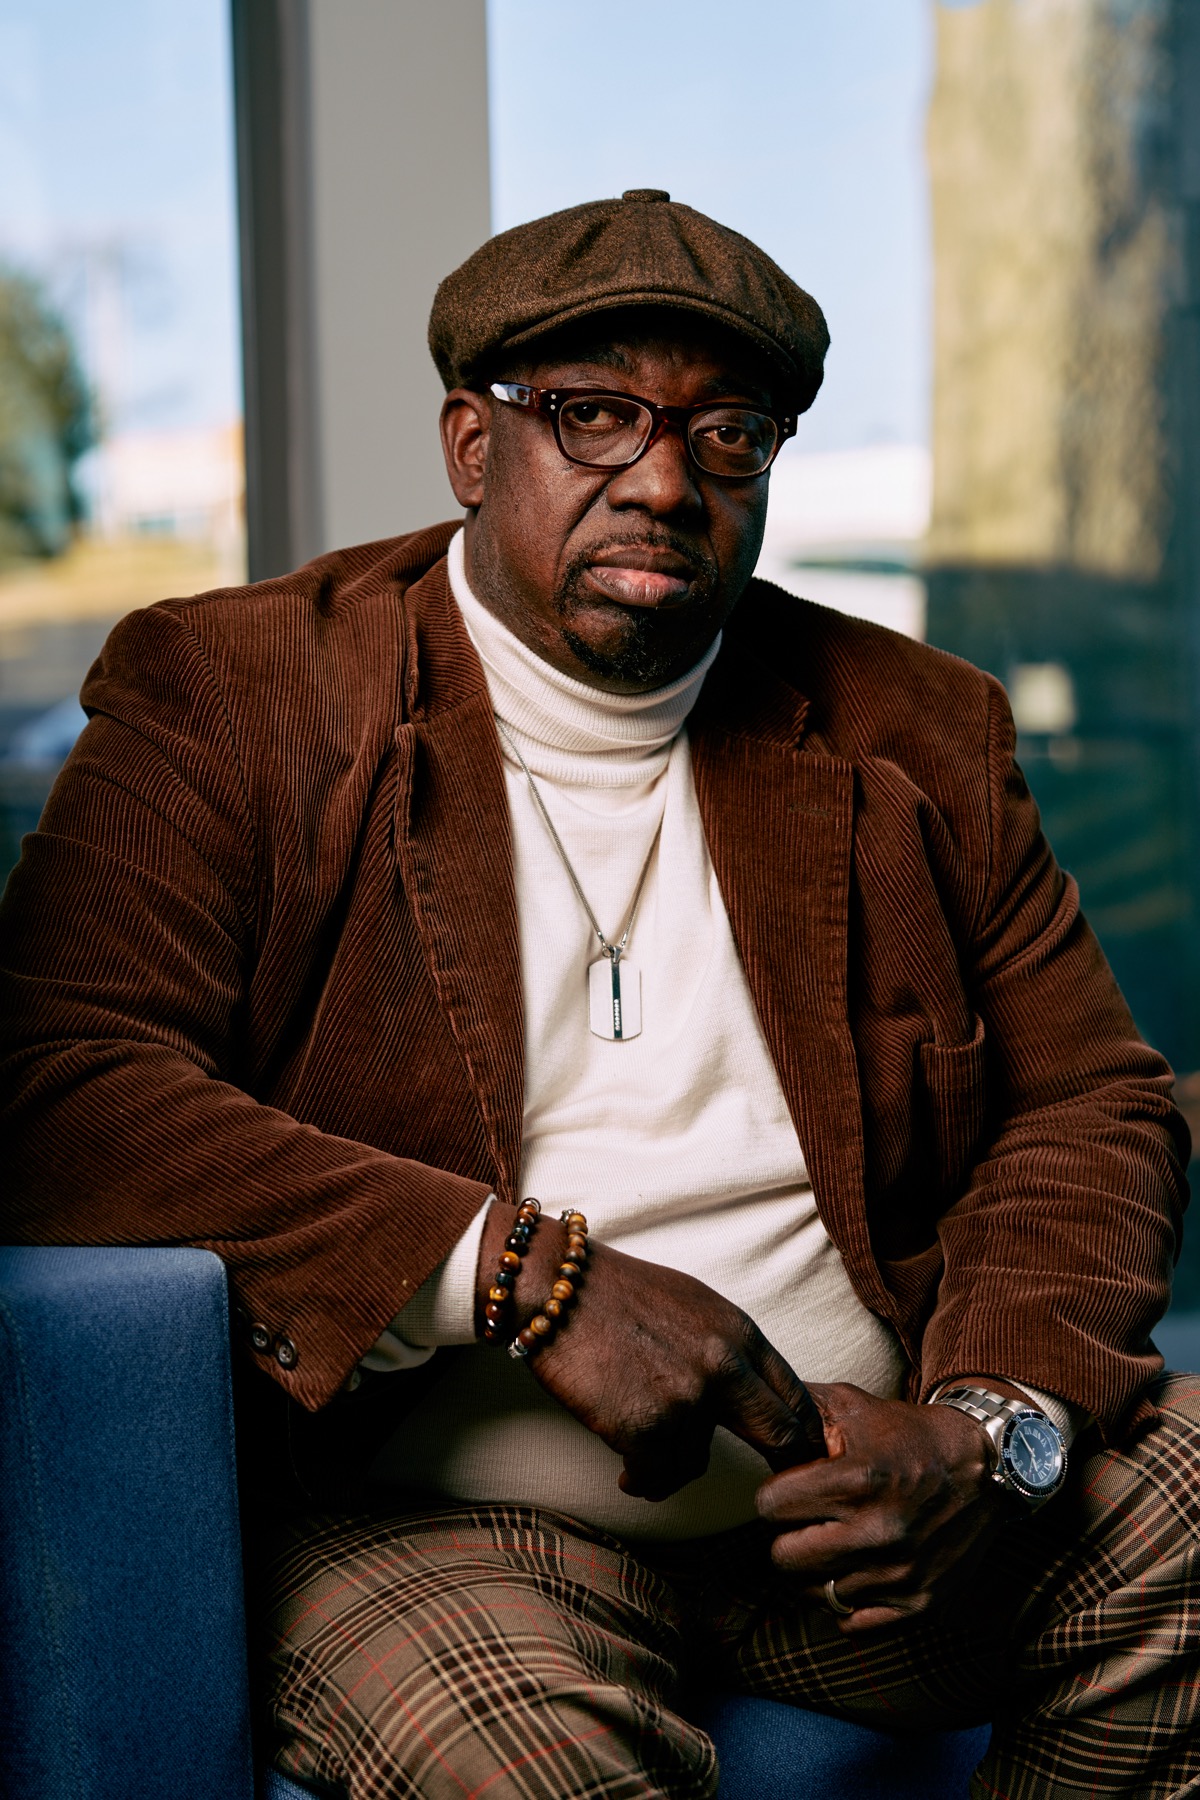 an older black man sitting on a chair wearing a newsy cap, looking pensively at the camera